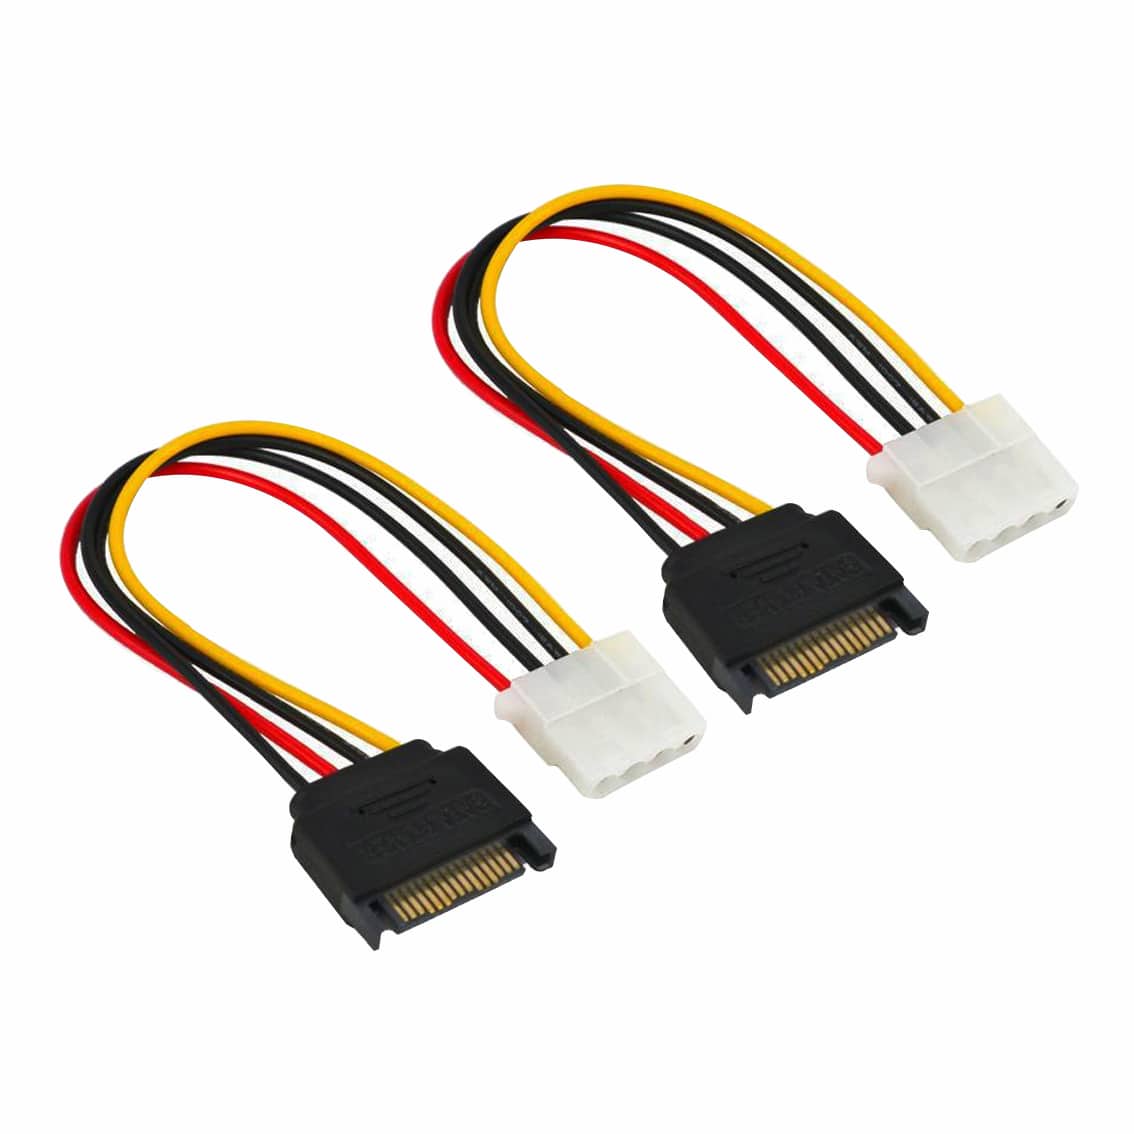 Almost dead Decline soul 15 Pin SATA Male to Molex IDE 4 Pin Female Power Adapter Cable - Pack of 2  - Phipps Electronics